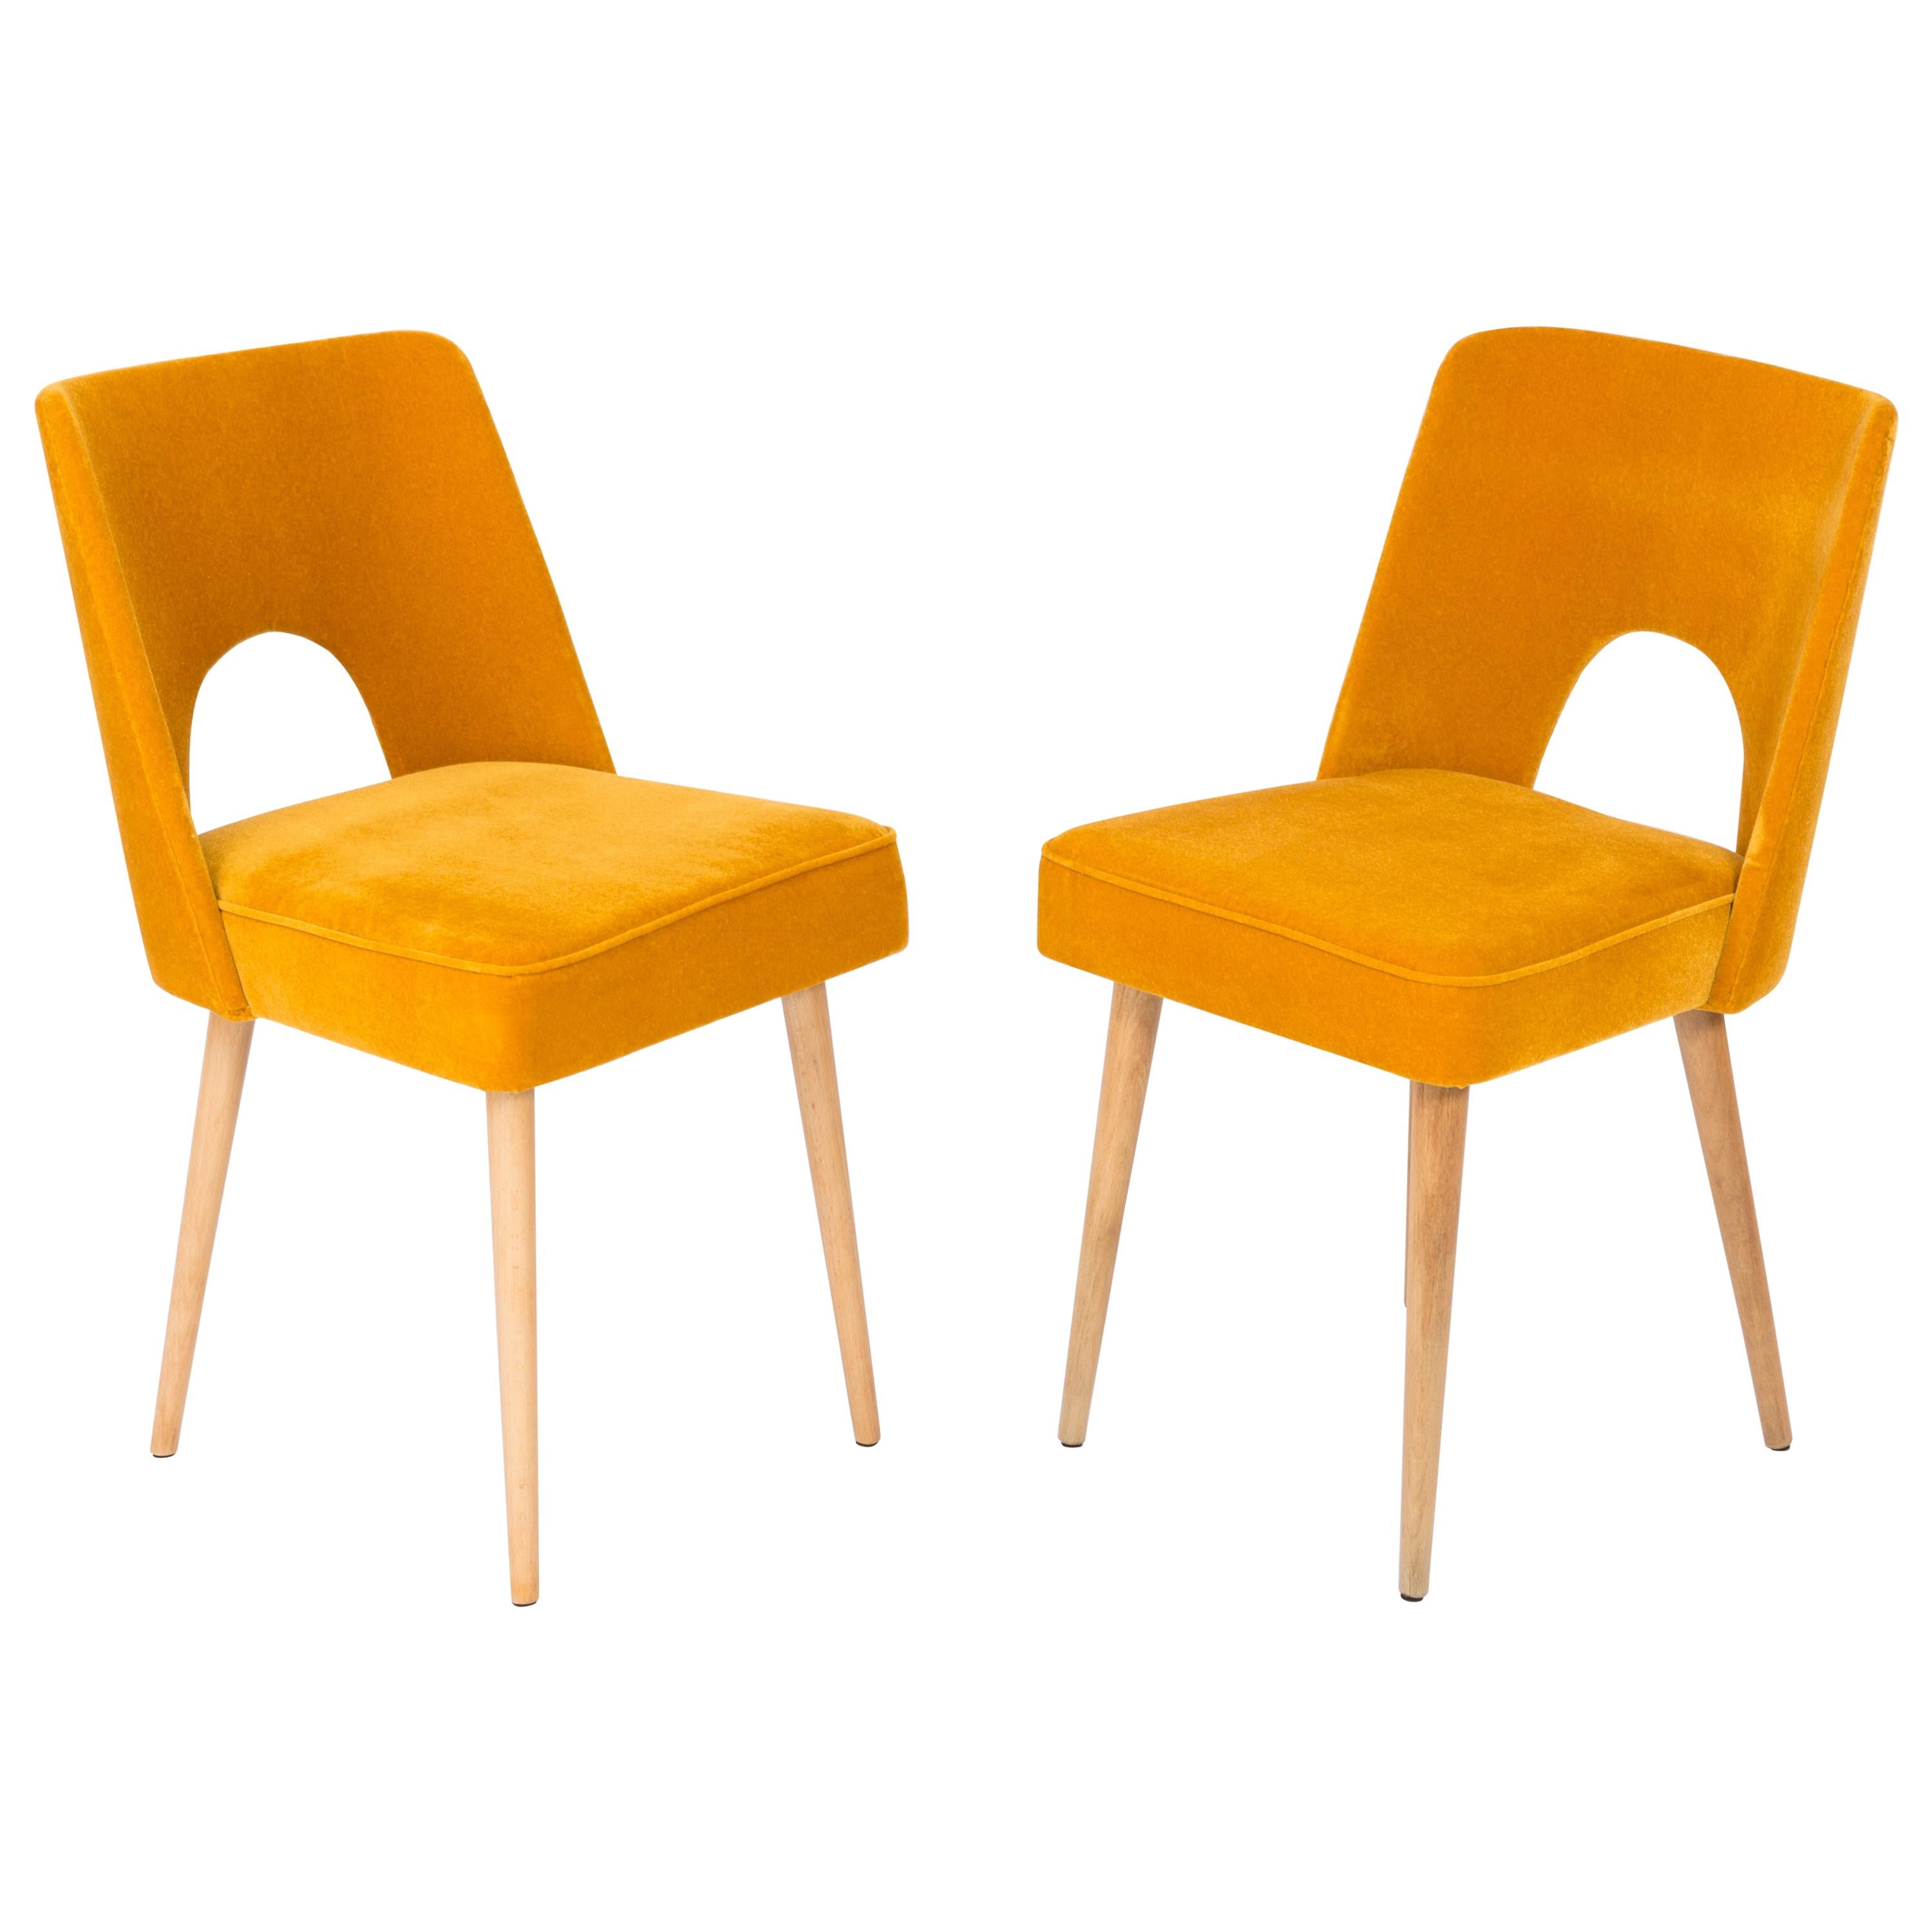 Set of Two Mustard Yellow Velvet 'Shell' Chairs, 1960s For Sale